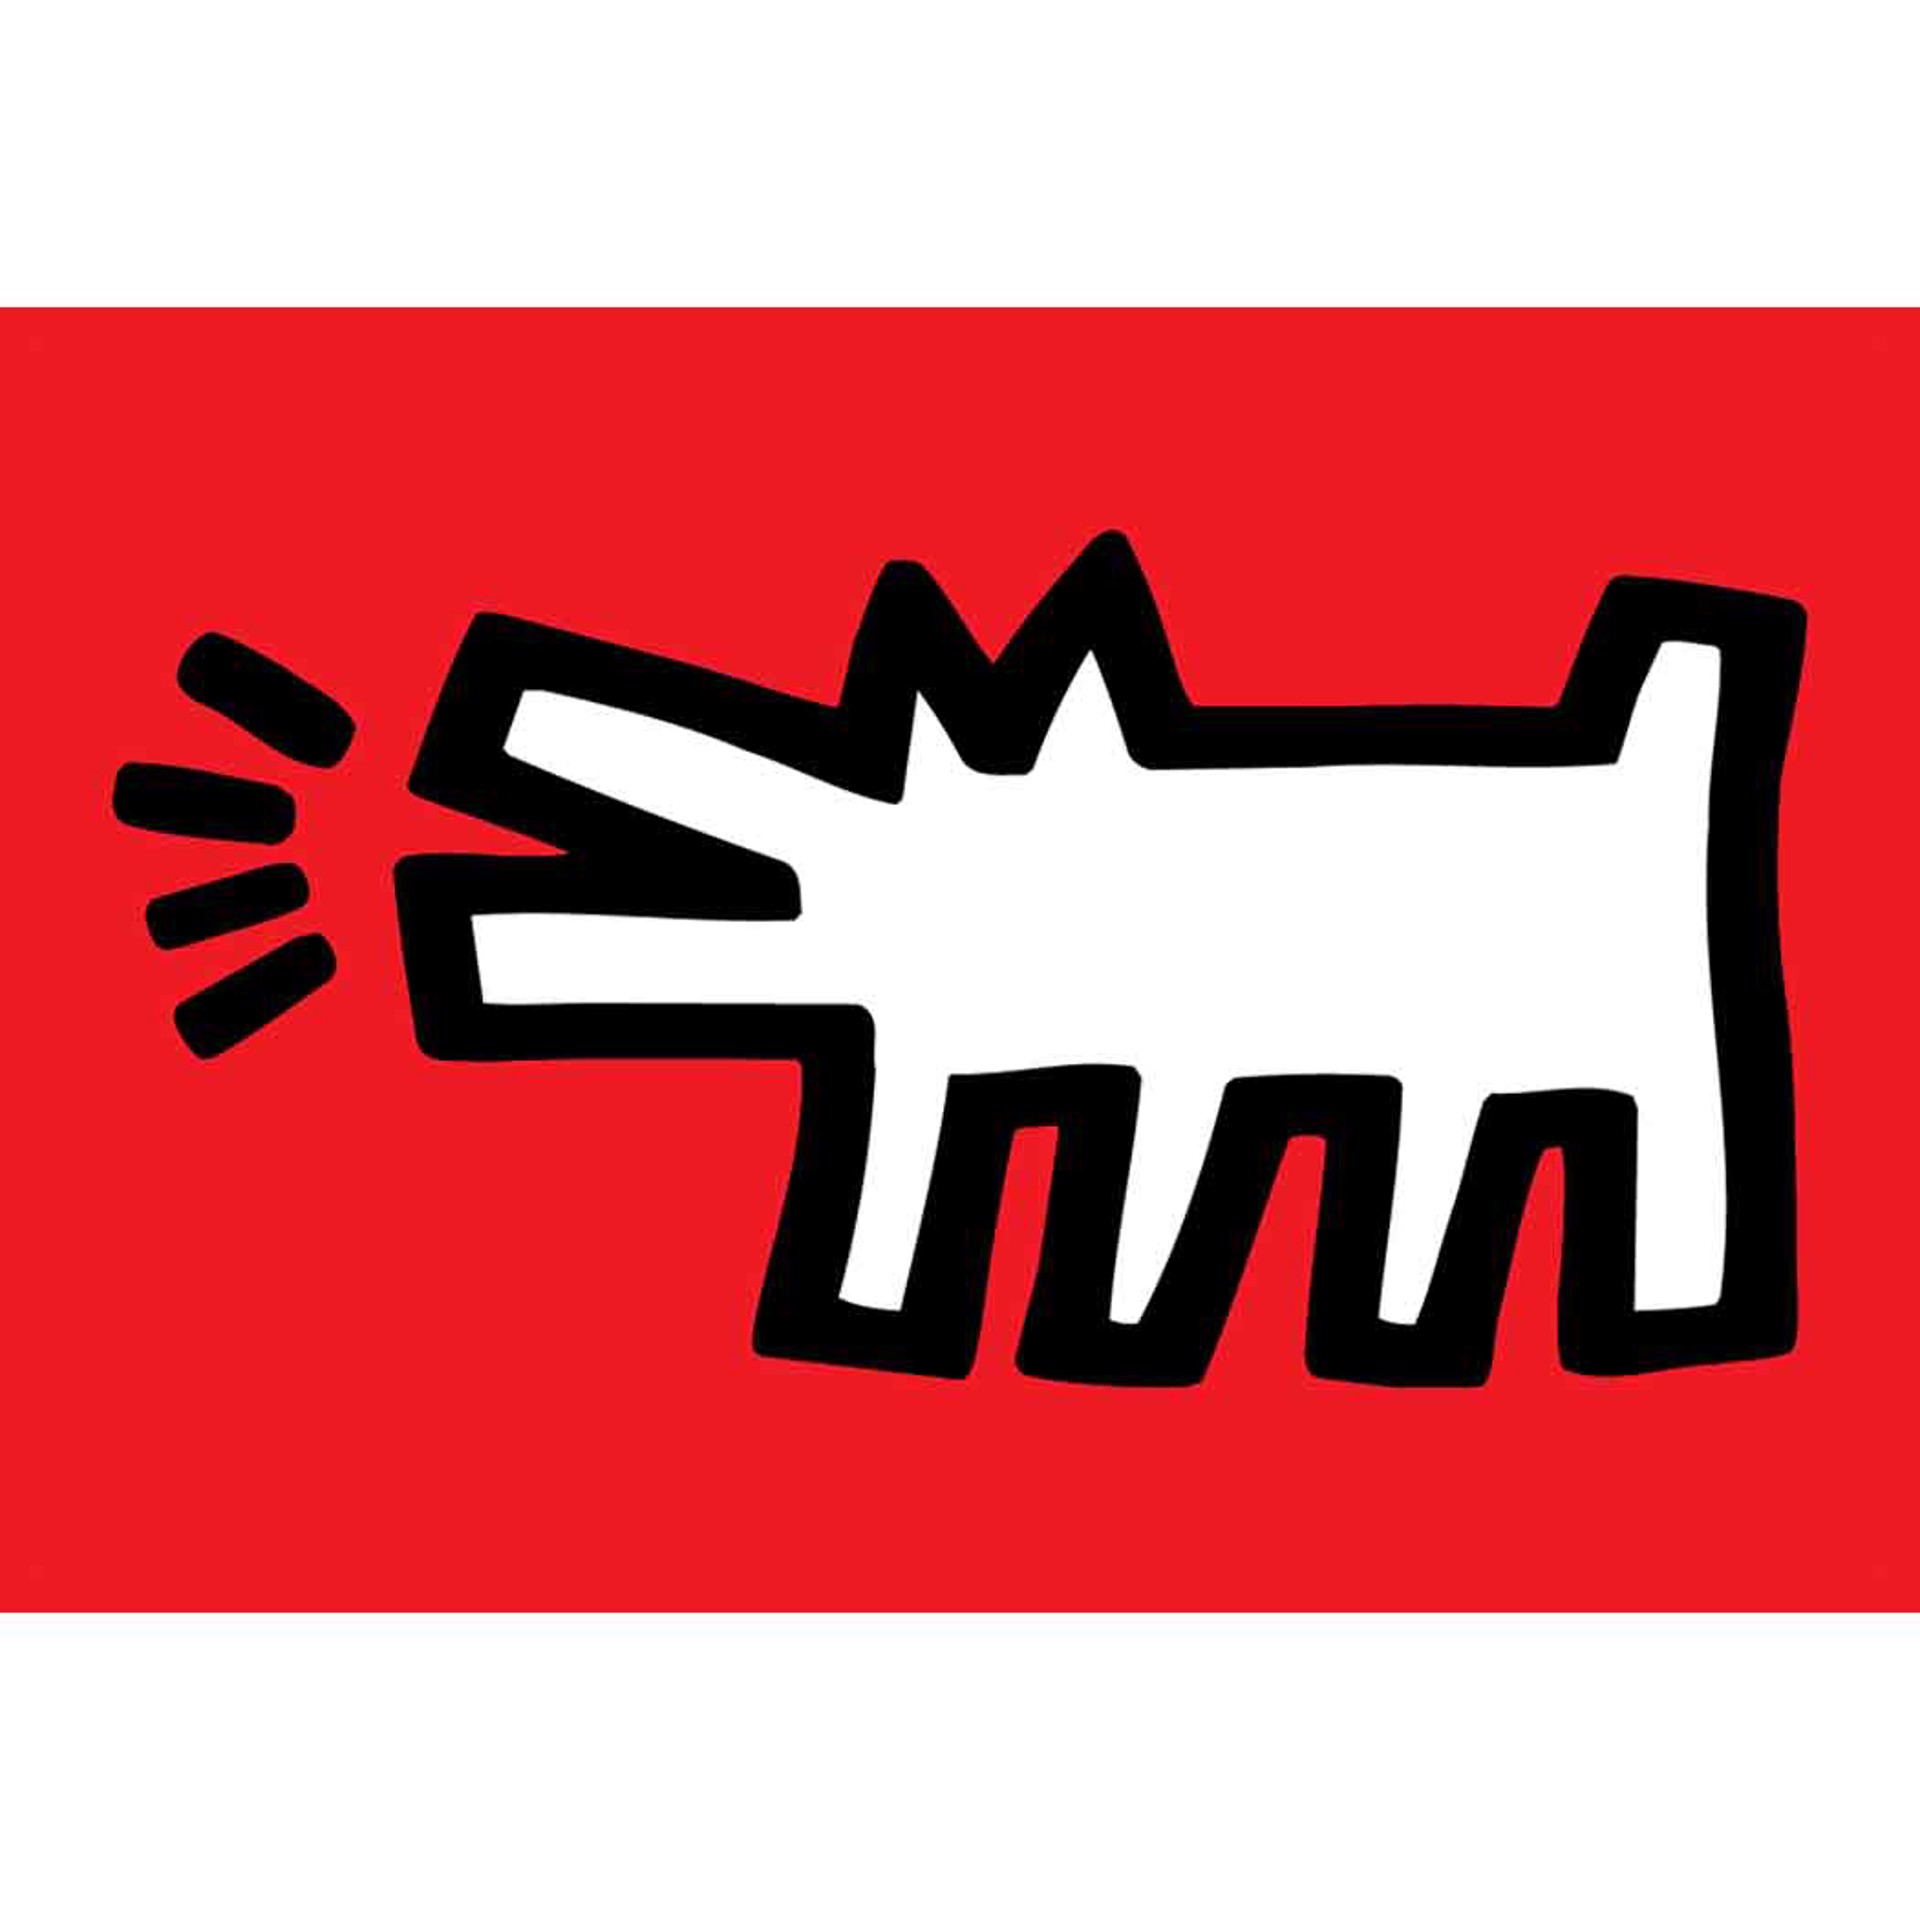 Barking Dog 2x3 Magnet by Keith Haring